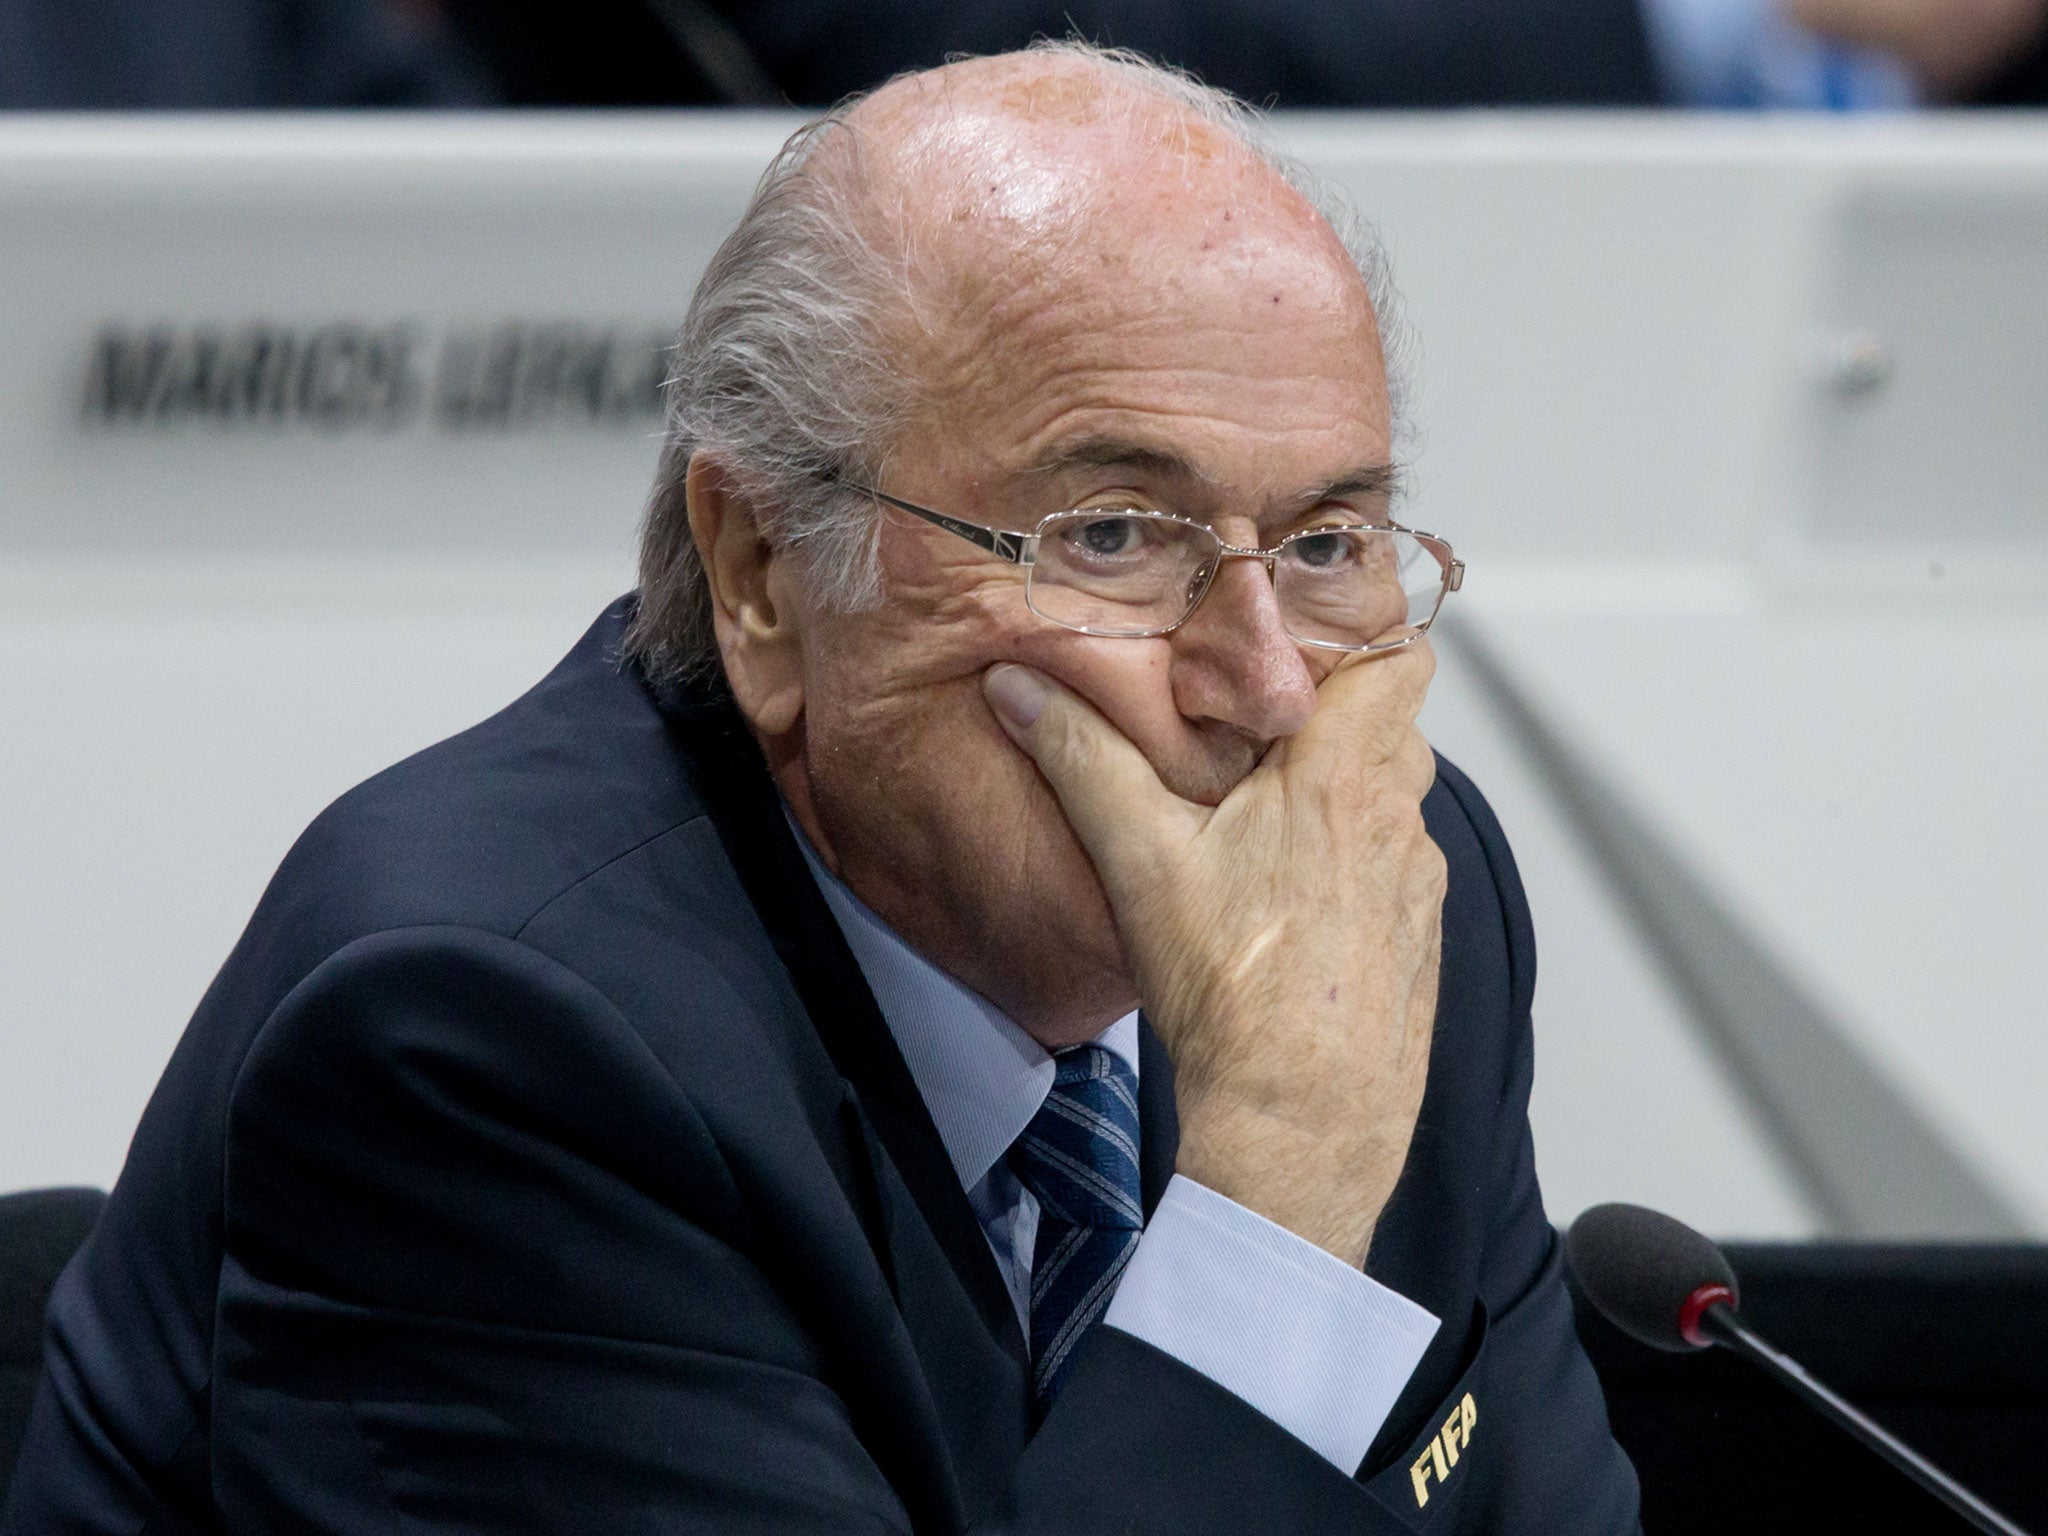 Blatter has faced some criticism